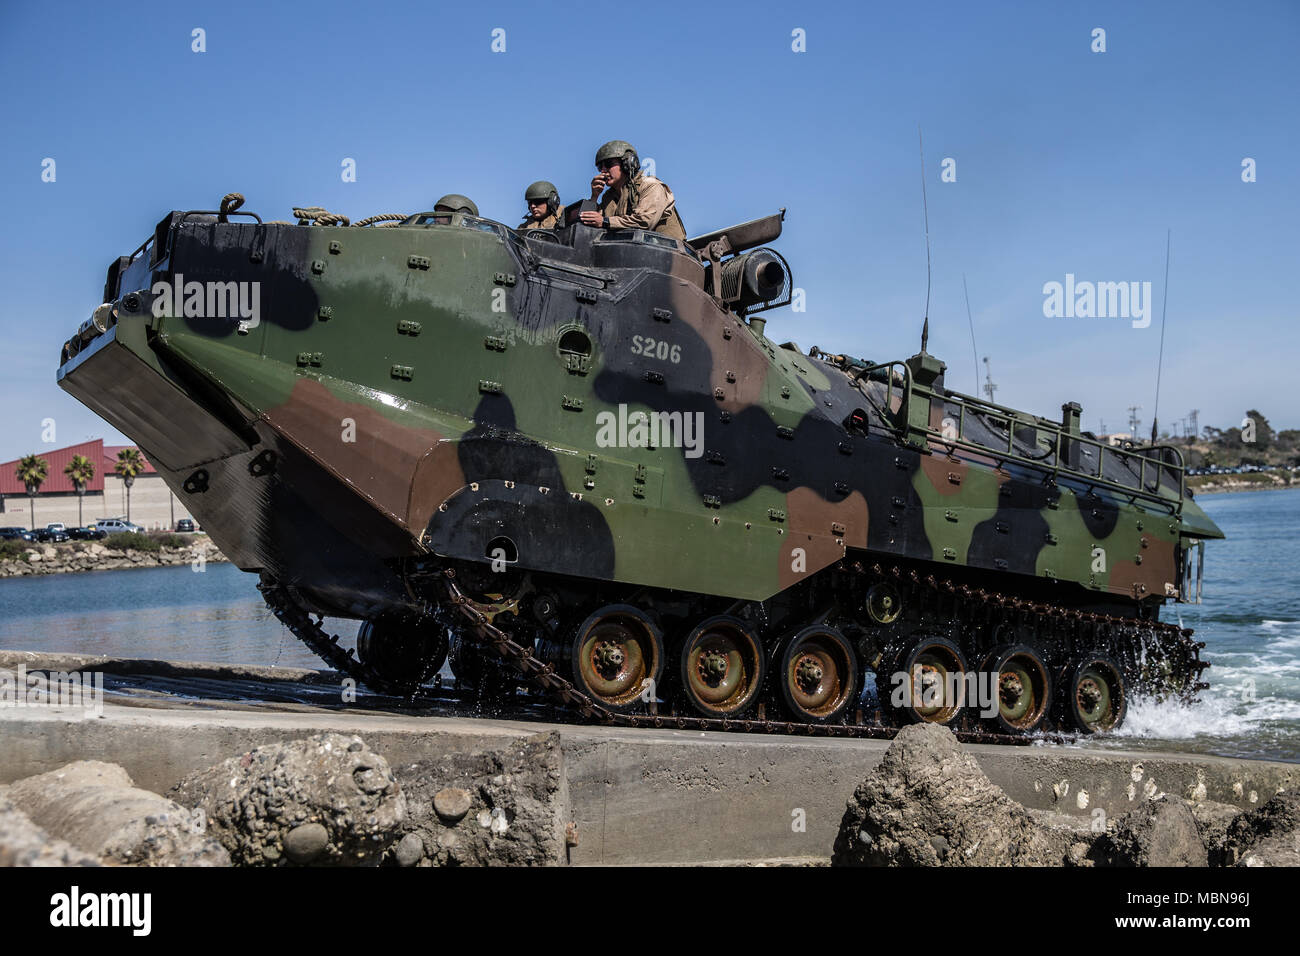 U.S. Marines with the Assault Amphibian School, recover an AAV-P7/A1 on Camp Pendleton, Calif., April 9, 2018. During the training, Class 6-18 learned how to drive and operate an AAV-P7/A1, and how to recover the vehicle after amphibious operations. (U.S. Marine Corps photo by Lance Cpl. Dalton Swanbeck) Stock Photo